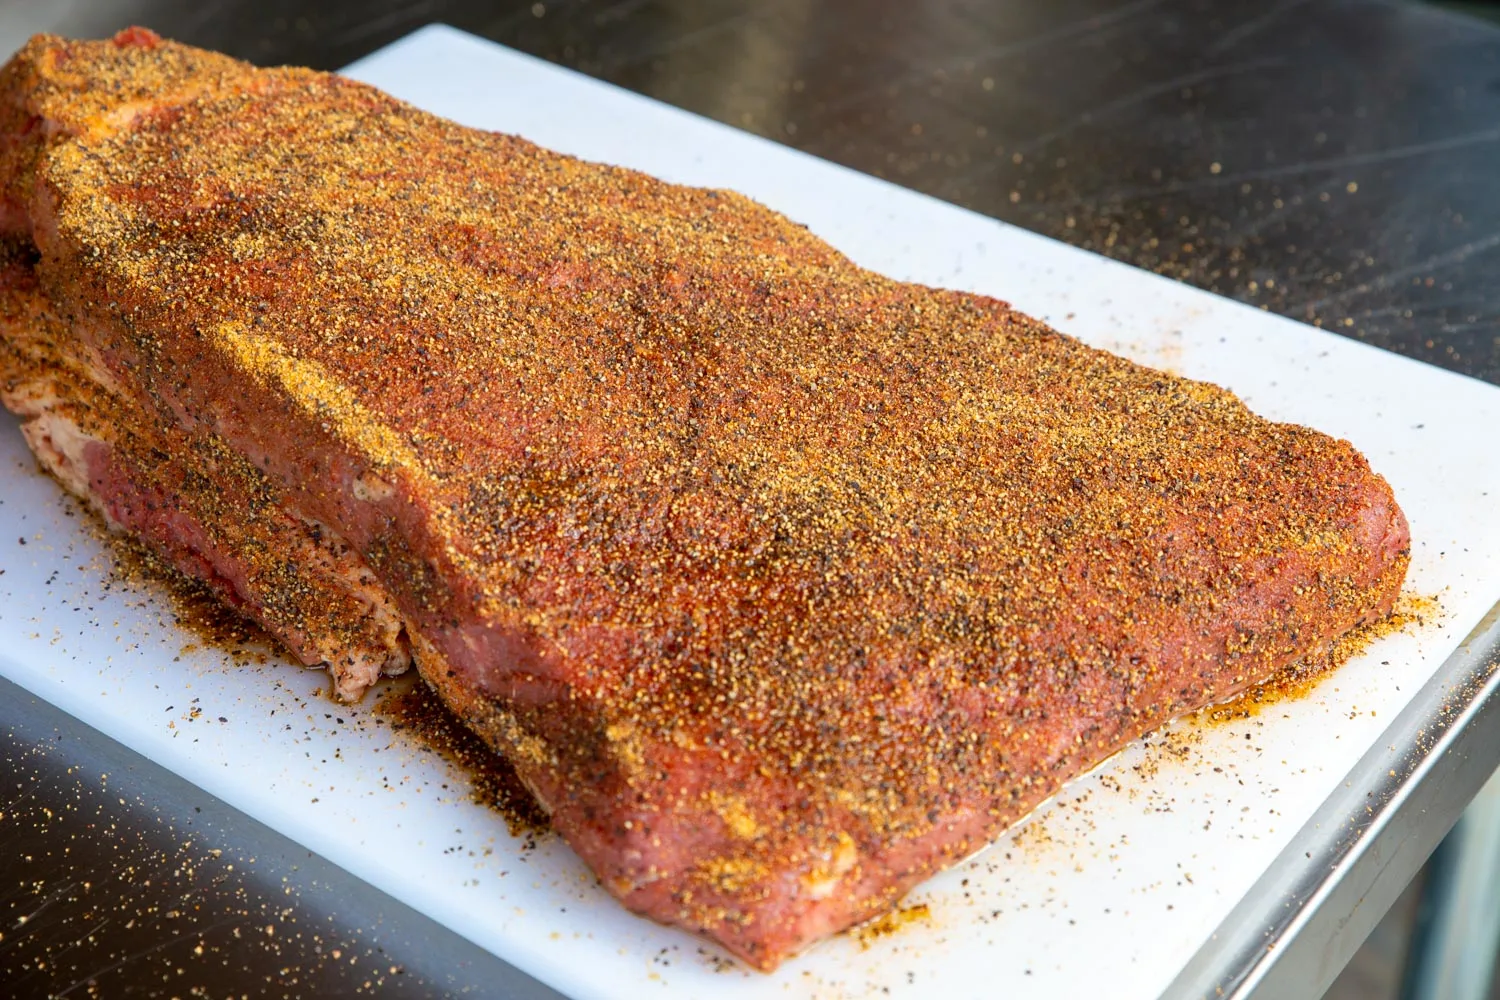 A brisket with dry rub sprinkled on correctly